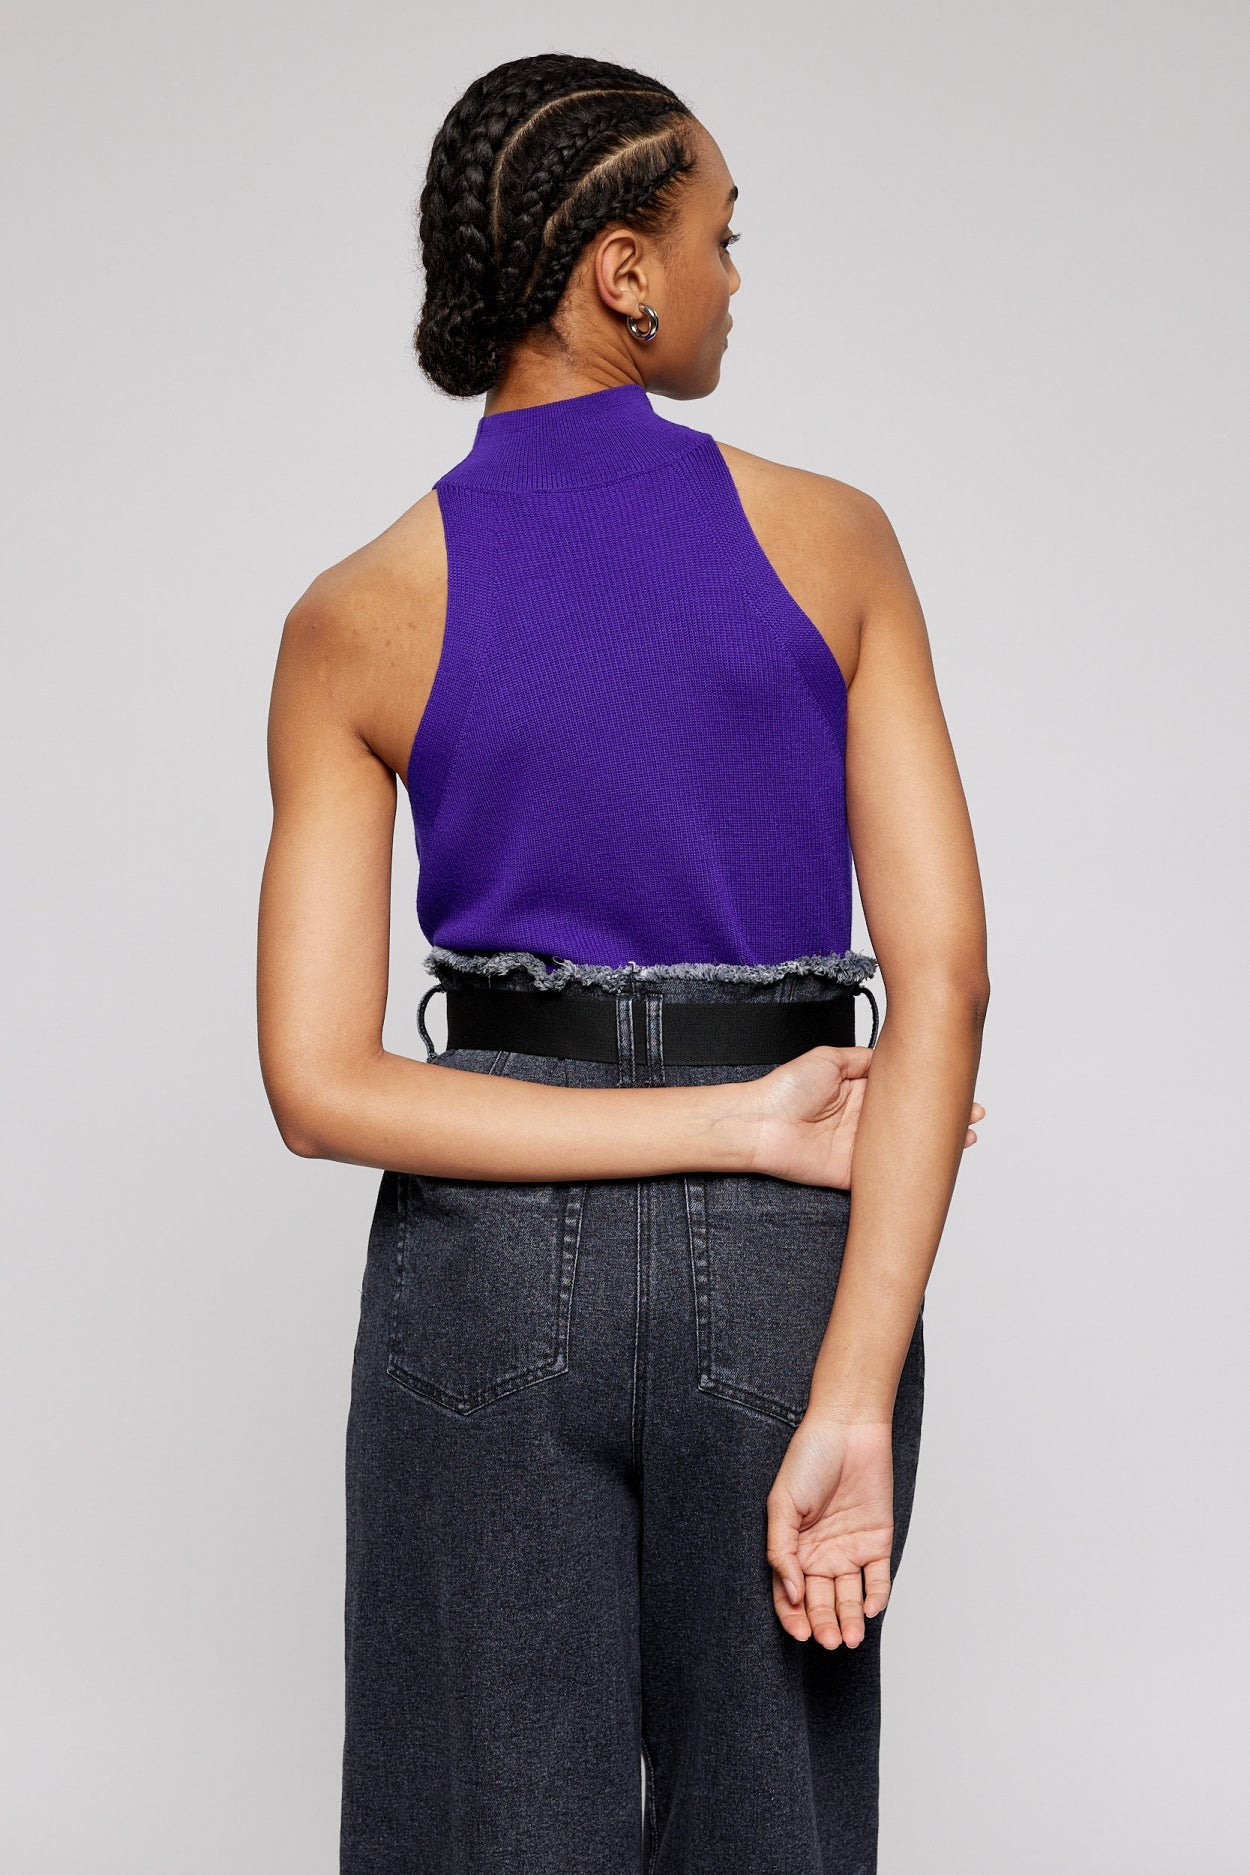 KONNIE knitted top | PURPLE